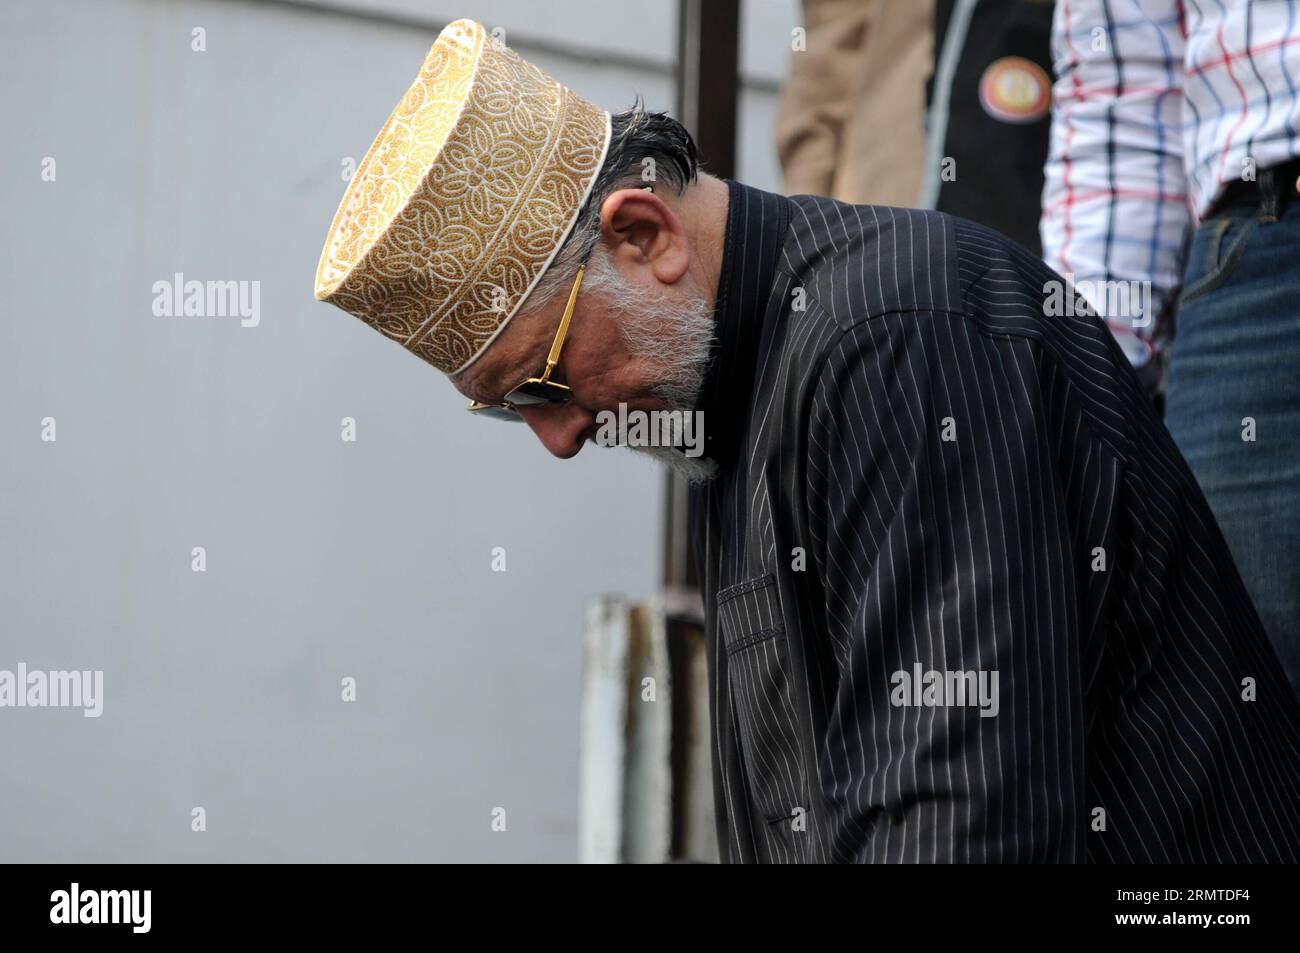 (140829) -- ISLAMABAD, Aug. 29, 2014 -- Pakistani religious leader Tahir-ul-Qadri leaves after offering Friday prayers held at an anti-government protest site in front of the Parliament in Islamabad capital of Pakistan on Aug. 29, 2014. Pakistani Prime Minister Nawaz Sharif Friday told parliament that he has not sought the army s mediation in the current political crisis as was claimed by two opposition leaders, whose activists have camped in Islamabad and are demanding his resignation. ) PAKISTAN-ISLAMABAD-PROTEST AhmadxKamal PUBLICATIONxNOTxINxCHN   Islamabad Aug 29 2014 Pakistani Religious Stock Photo